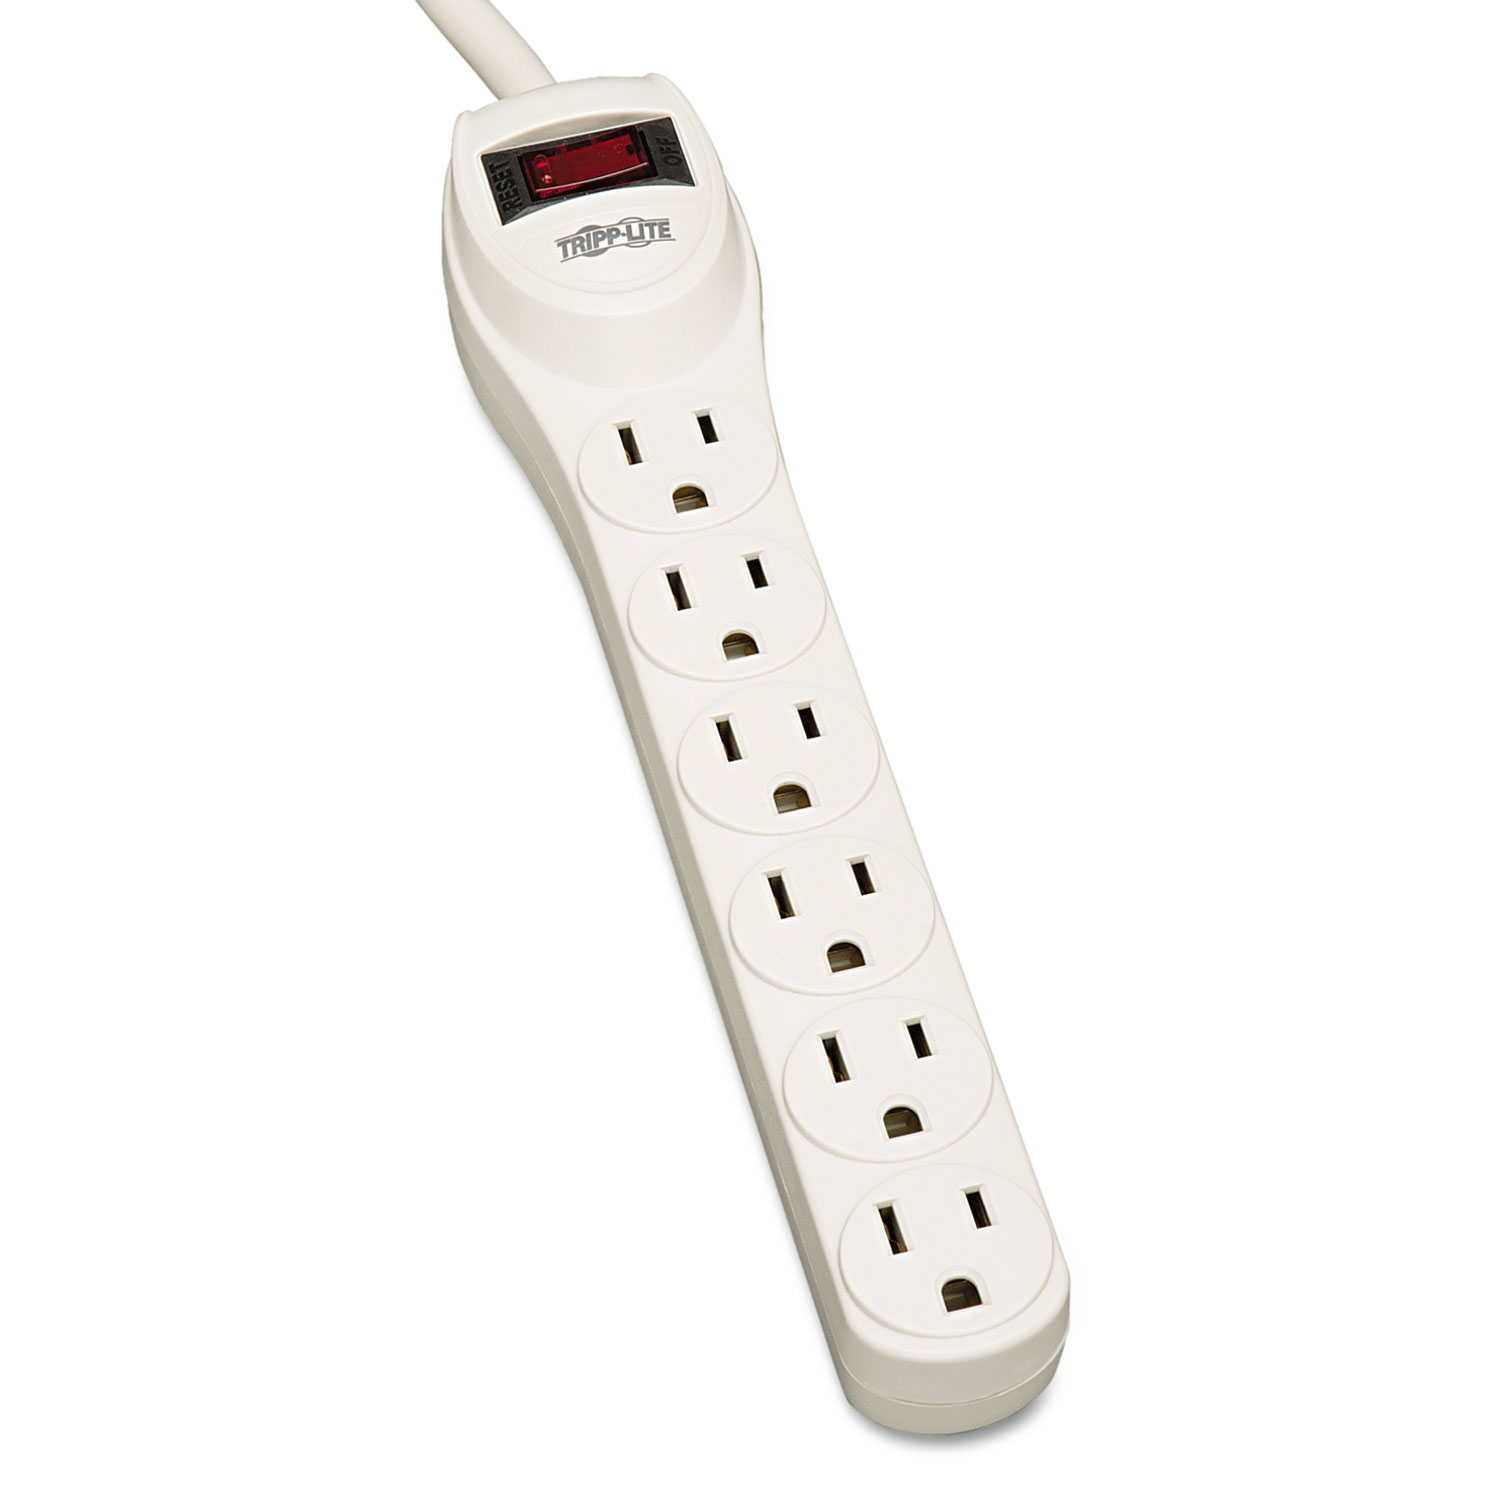  Tripp Lite TLP602 Protect It! Home Computer Surge Protector, 6 Outlets, 2 ft. Cord, 180 Joules (TRPTLP602) 